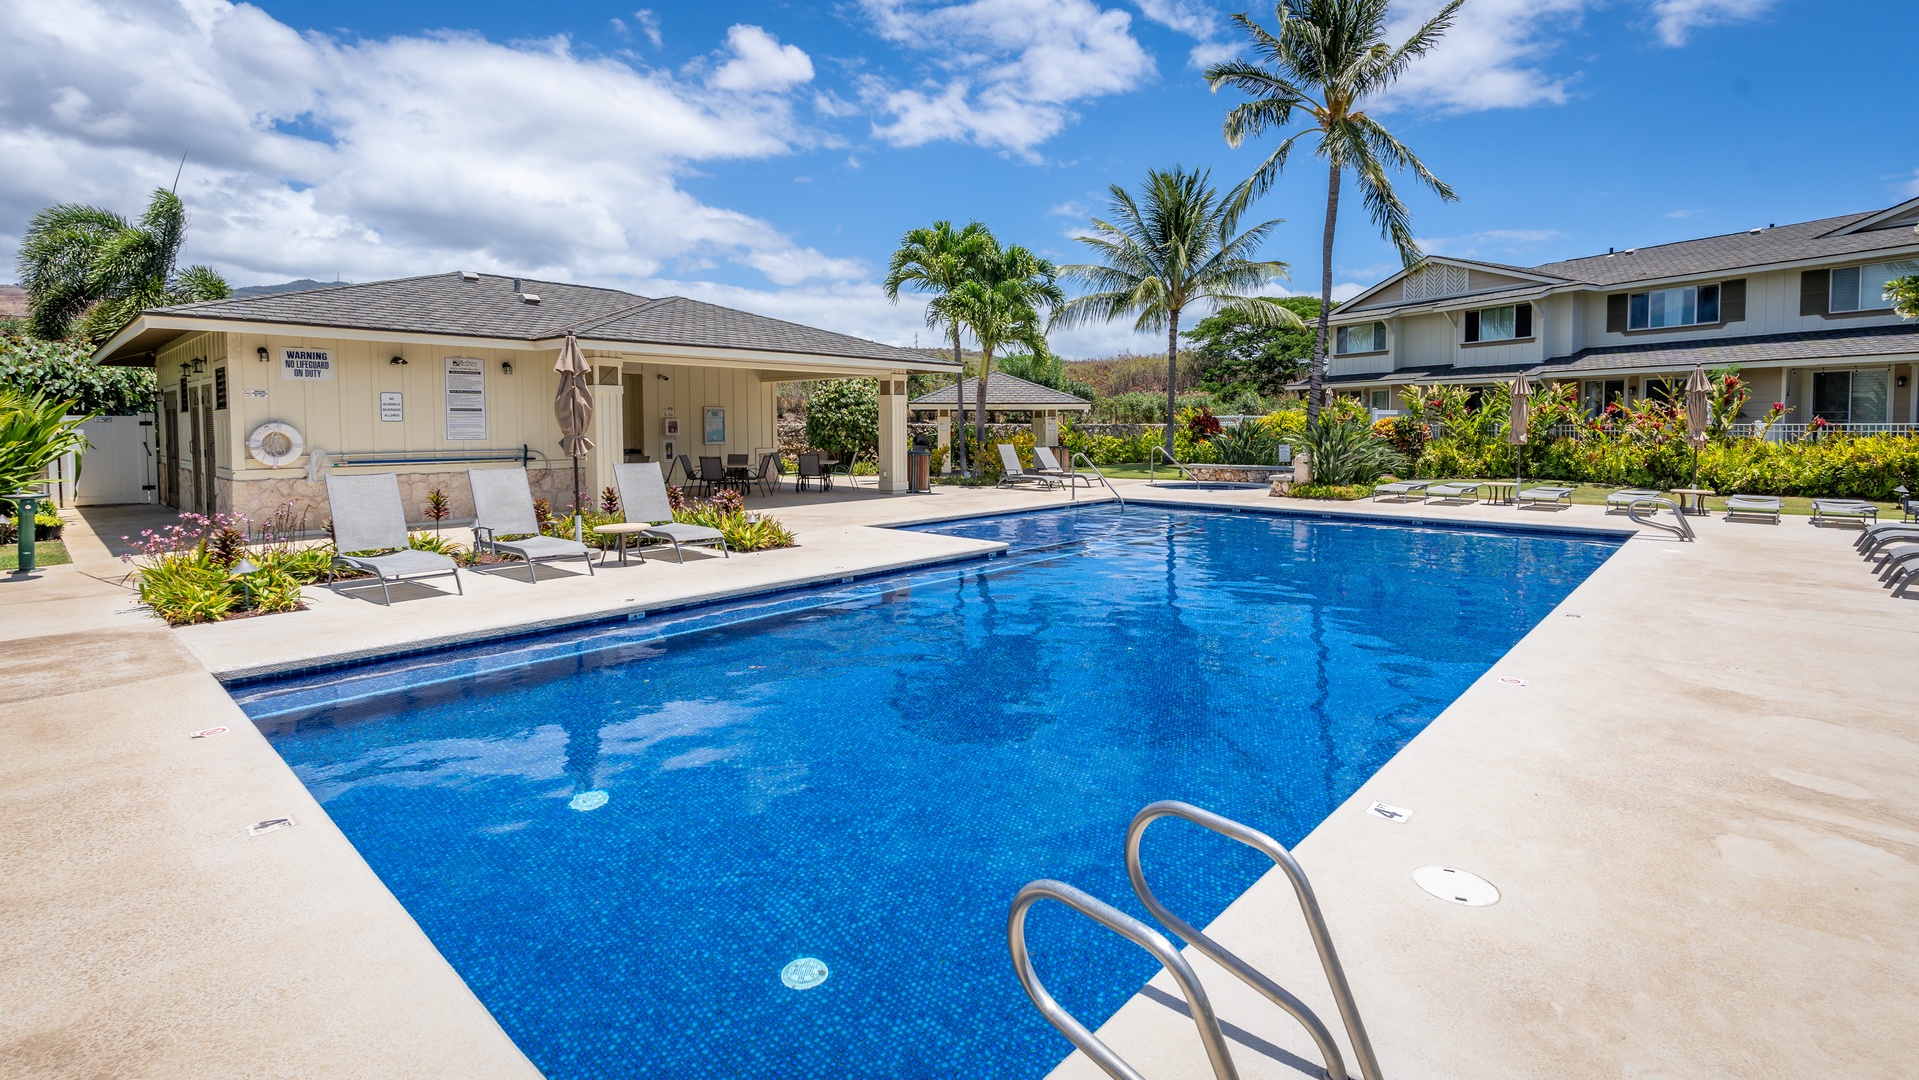 Kapolei Vacation Rentals, Hillside Villas 1496-2 - Go for a swim in the sparkling waters and rest in the lounge chairs by the pool.